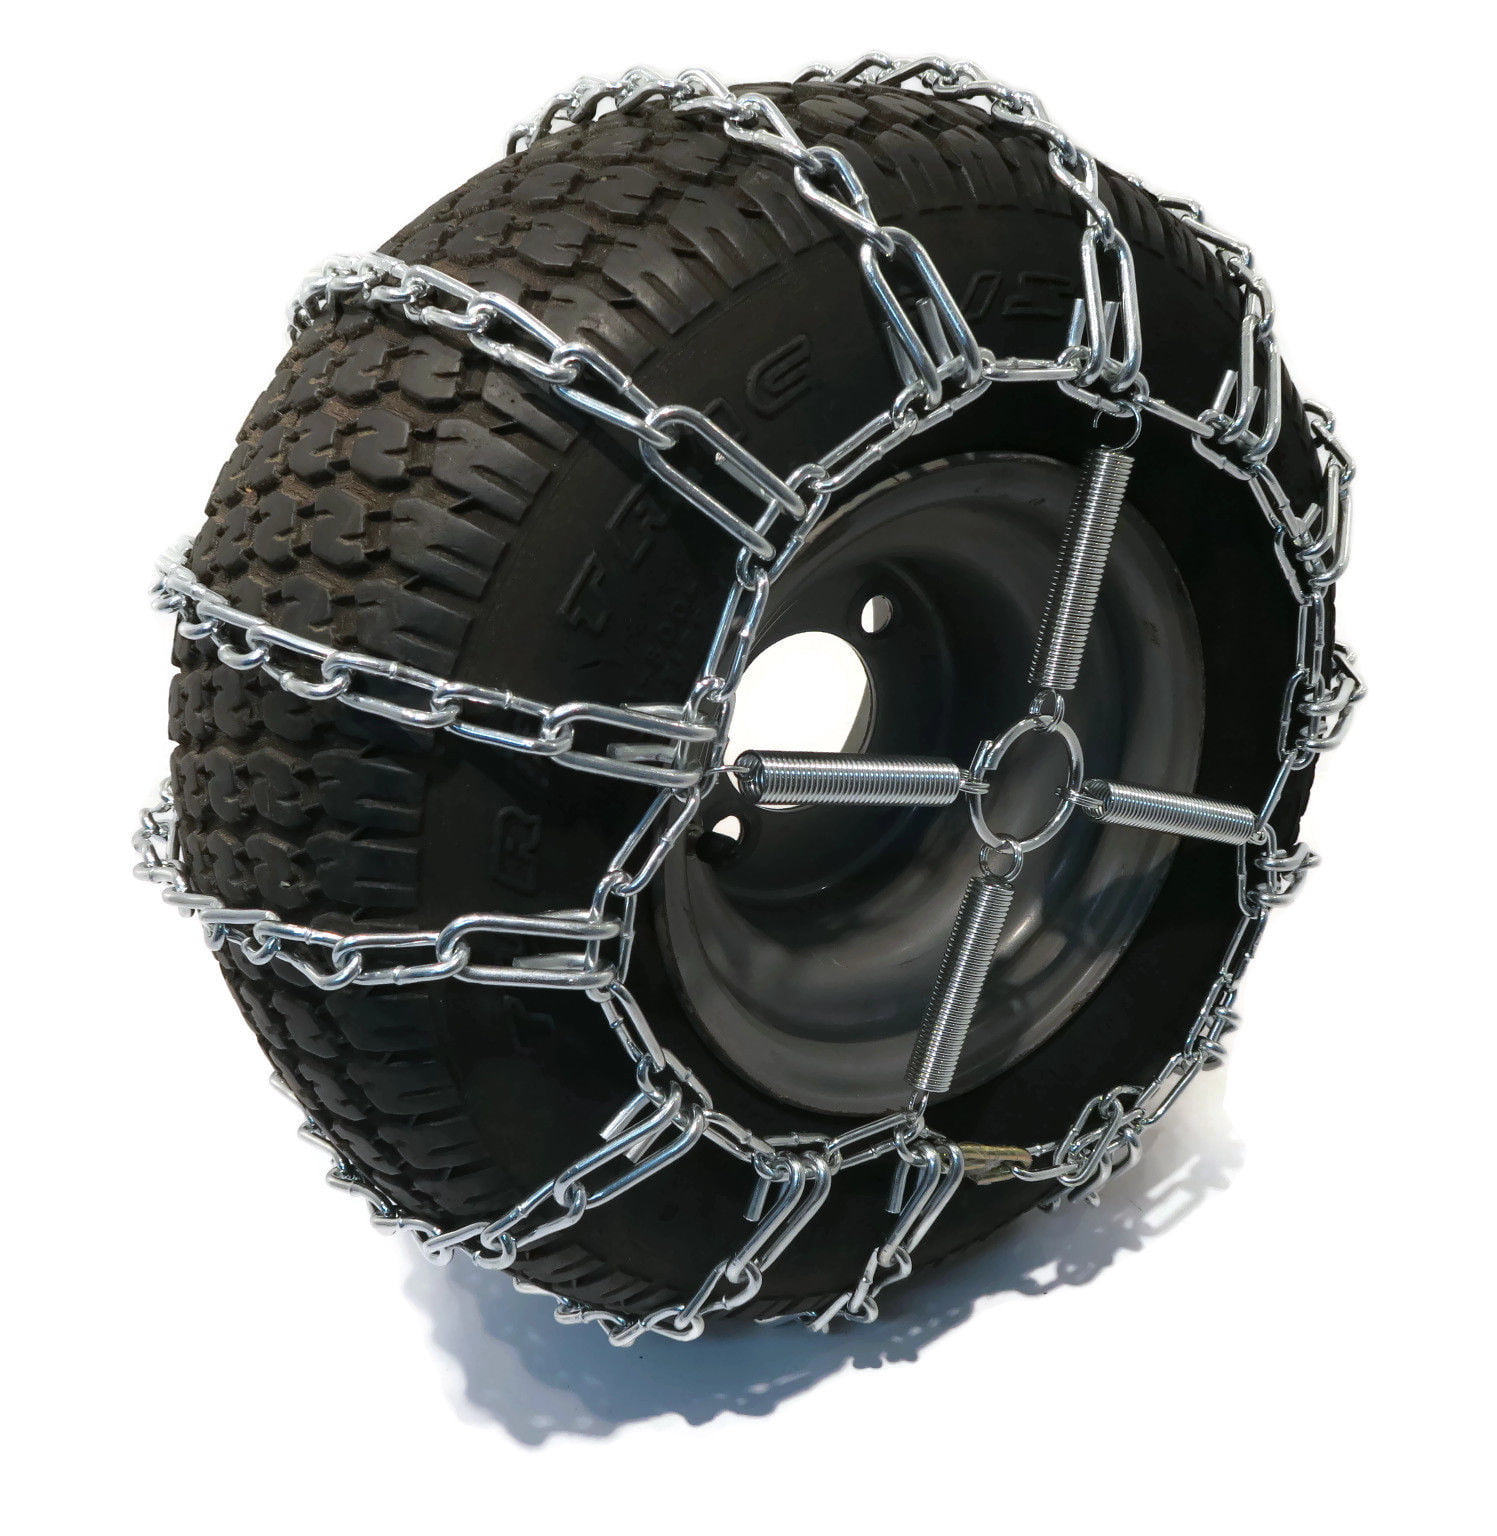 The ROP Shop 2 Link TIRE Chains 18x9.50-8 18x950-8 18-9.50-8 Tractor Mower Rider Snowblower